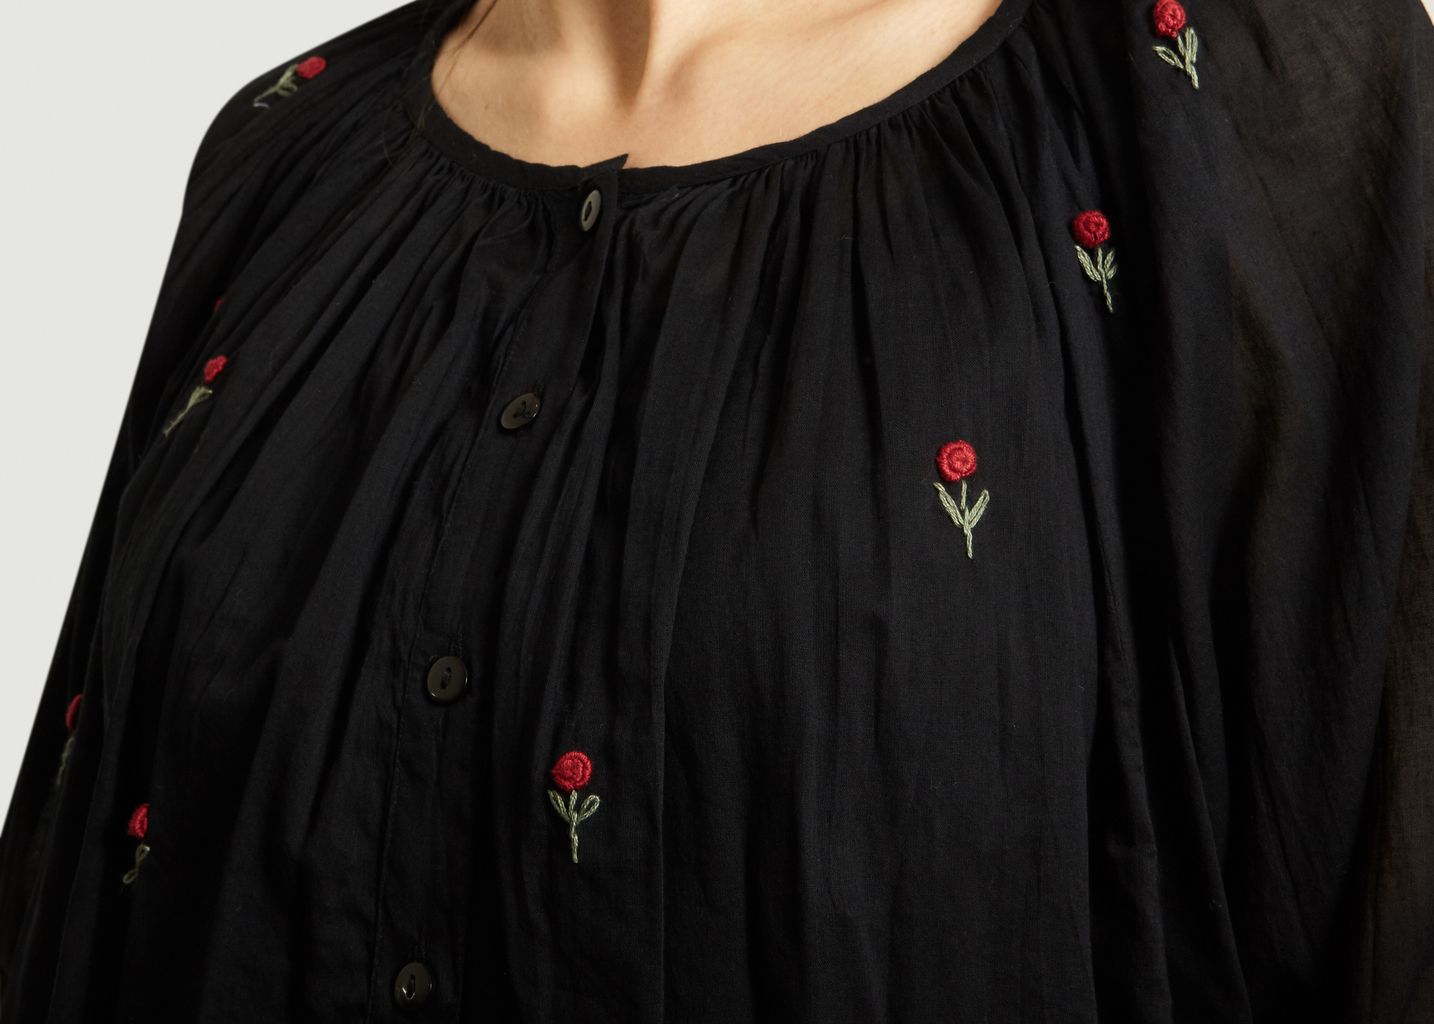 Begonia Embroidered Dress - Mes Demoiselles